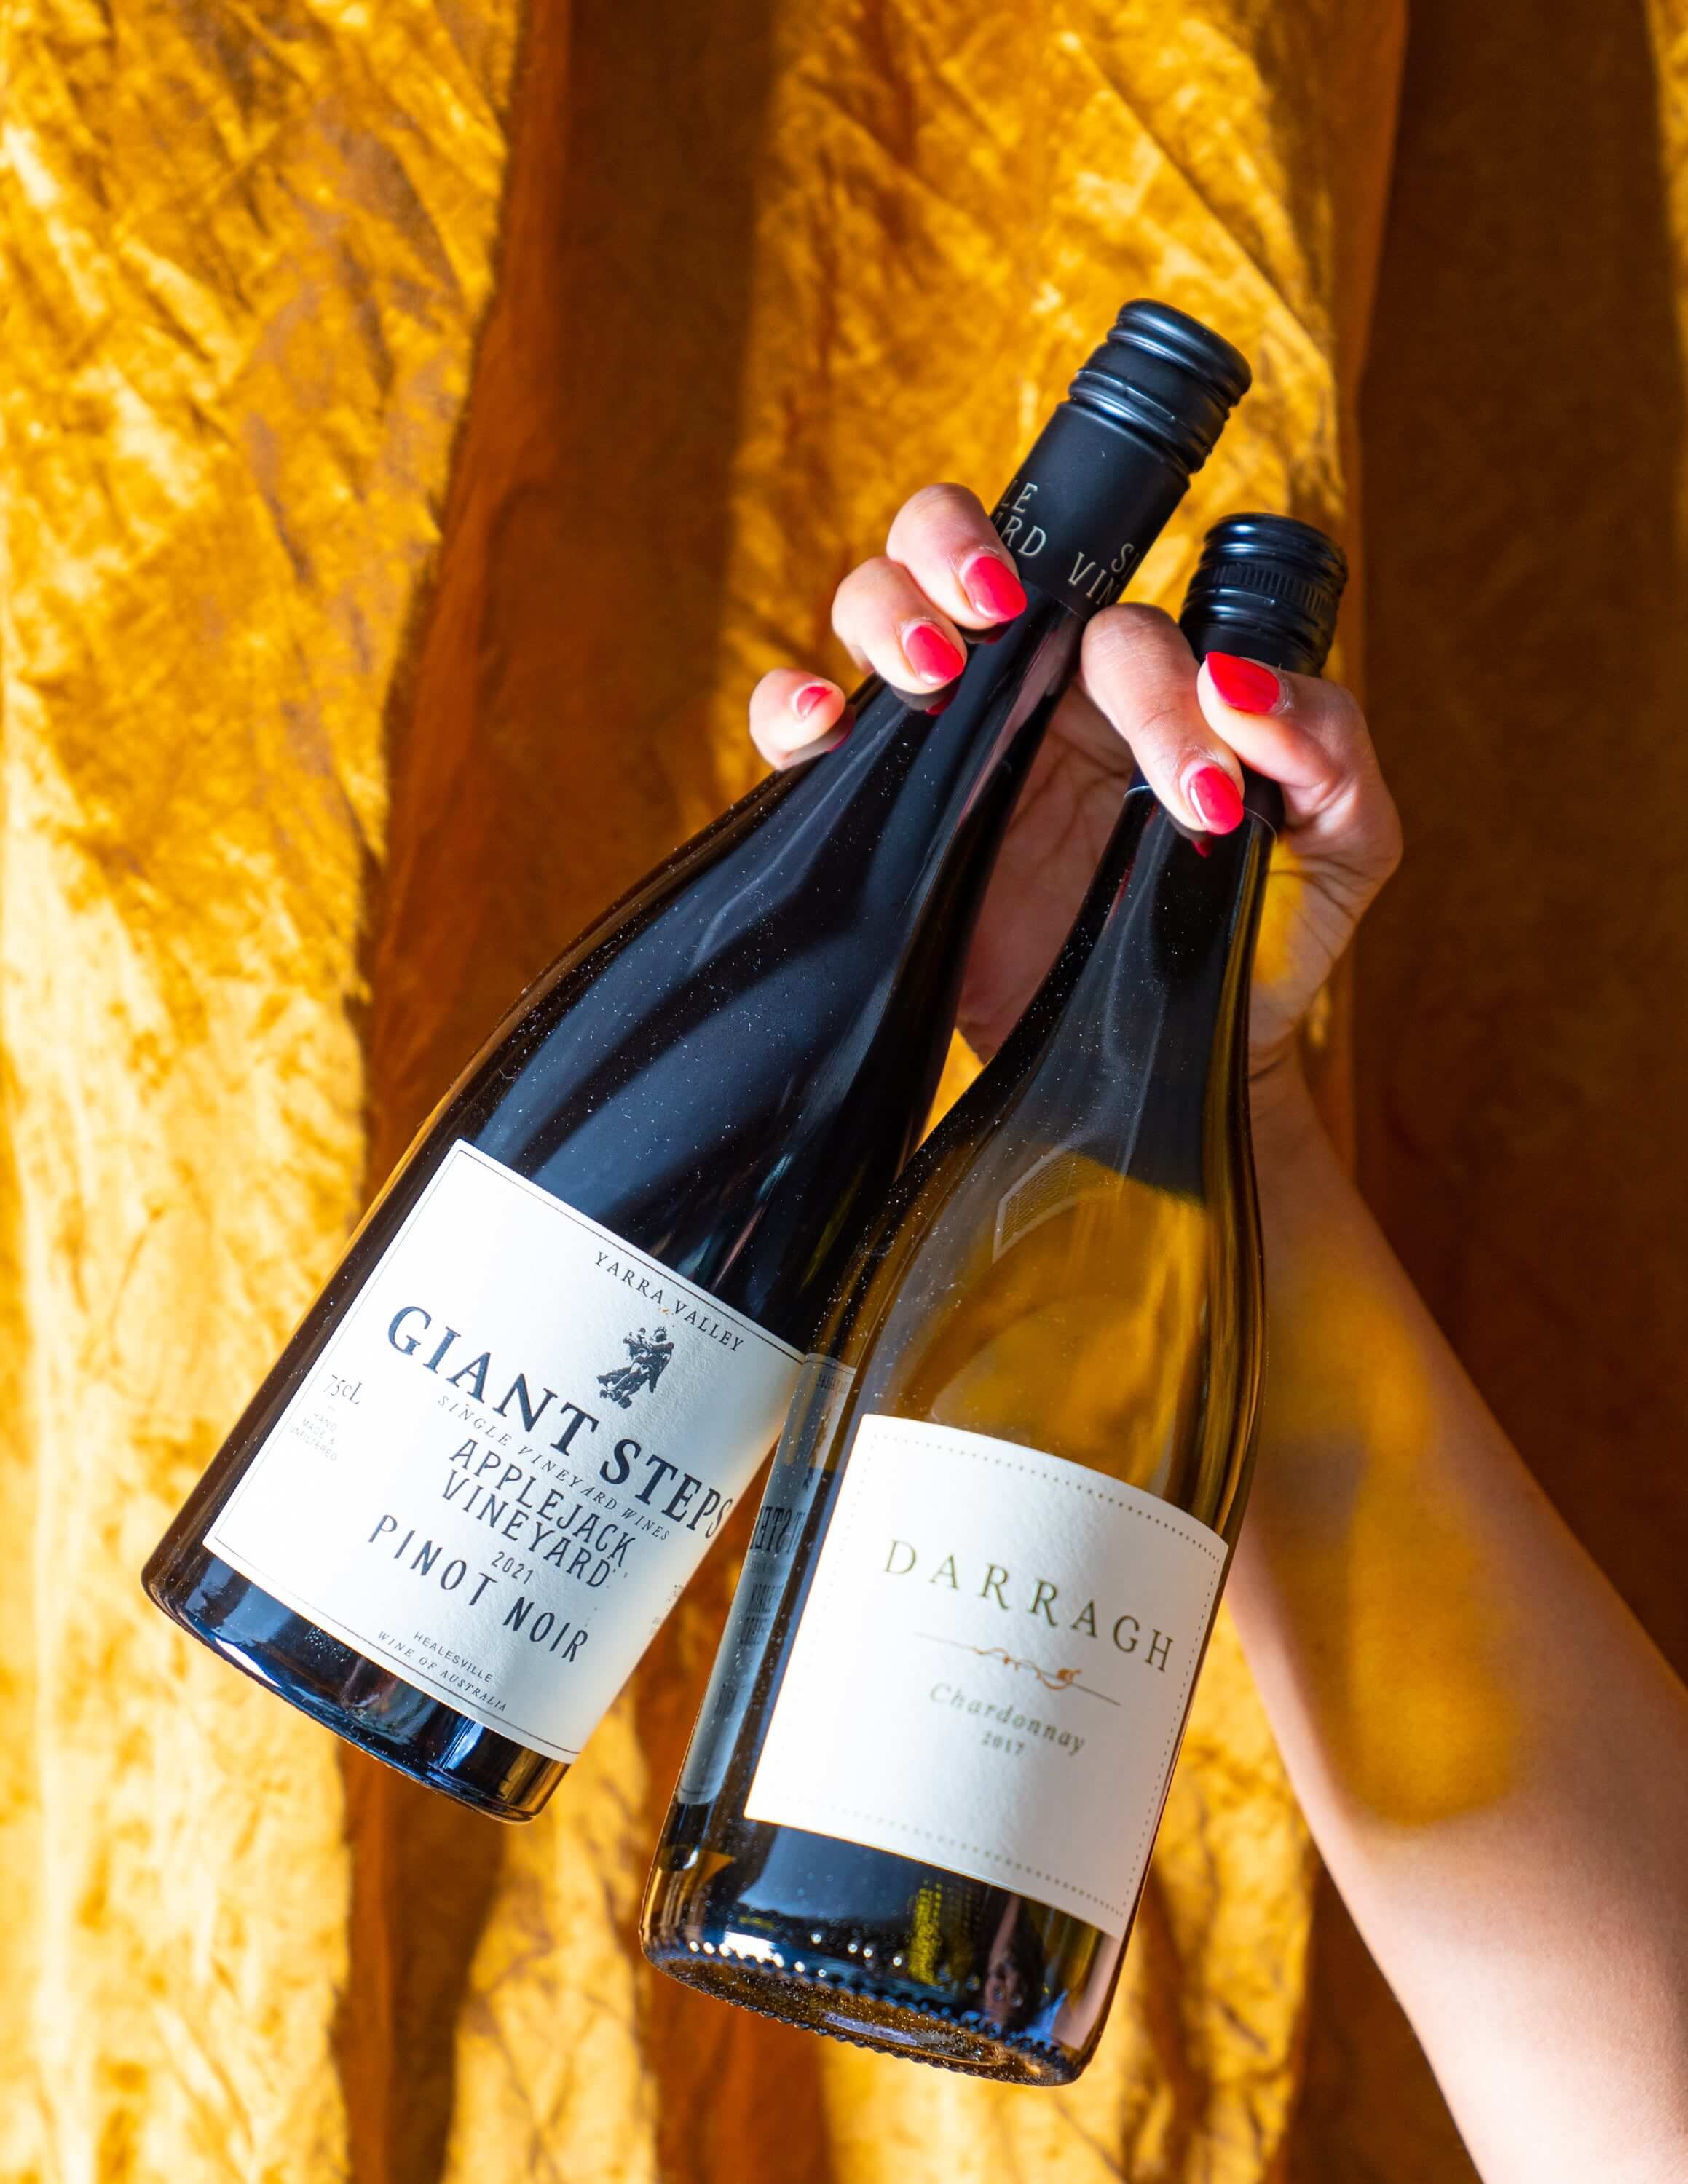  A hand holding up a bottle of Chardonnay and Pinot Noir against a gold background 